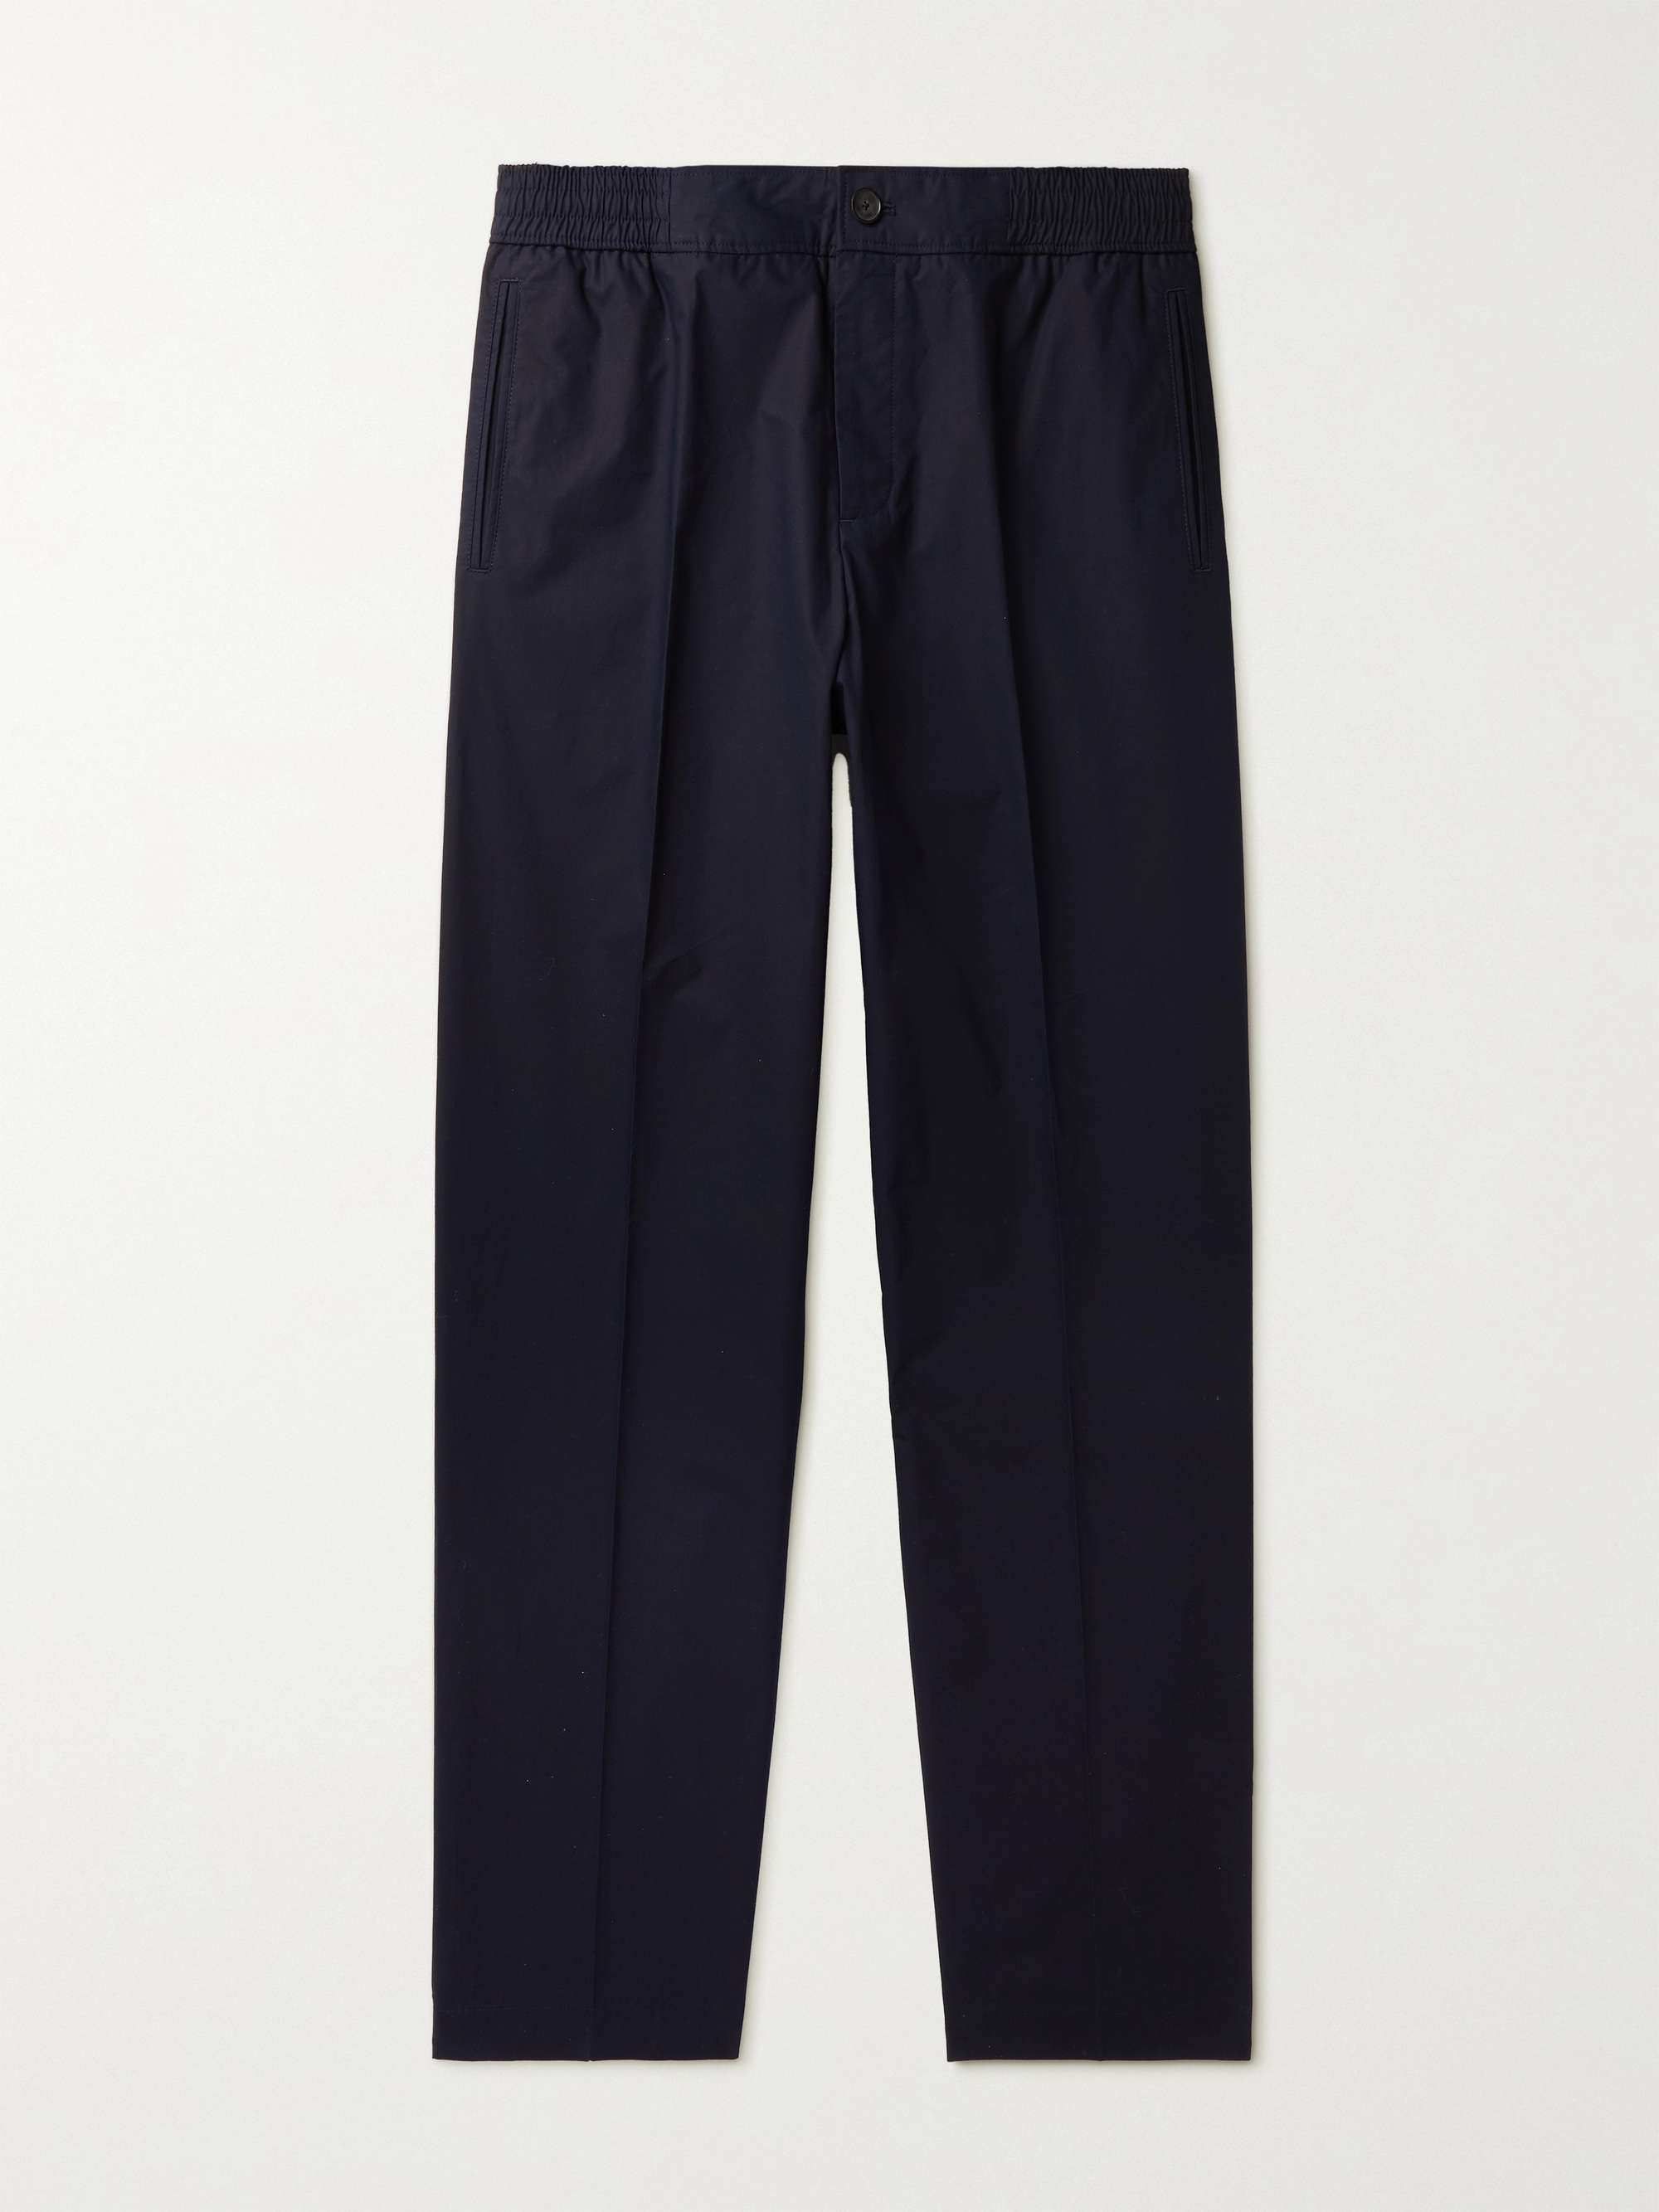 Buy Men Relaxed Fit Trousers Online In India-saigonsouth.com.vn